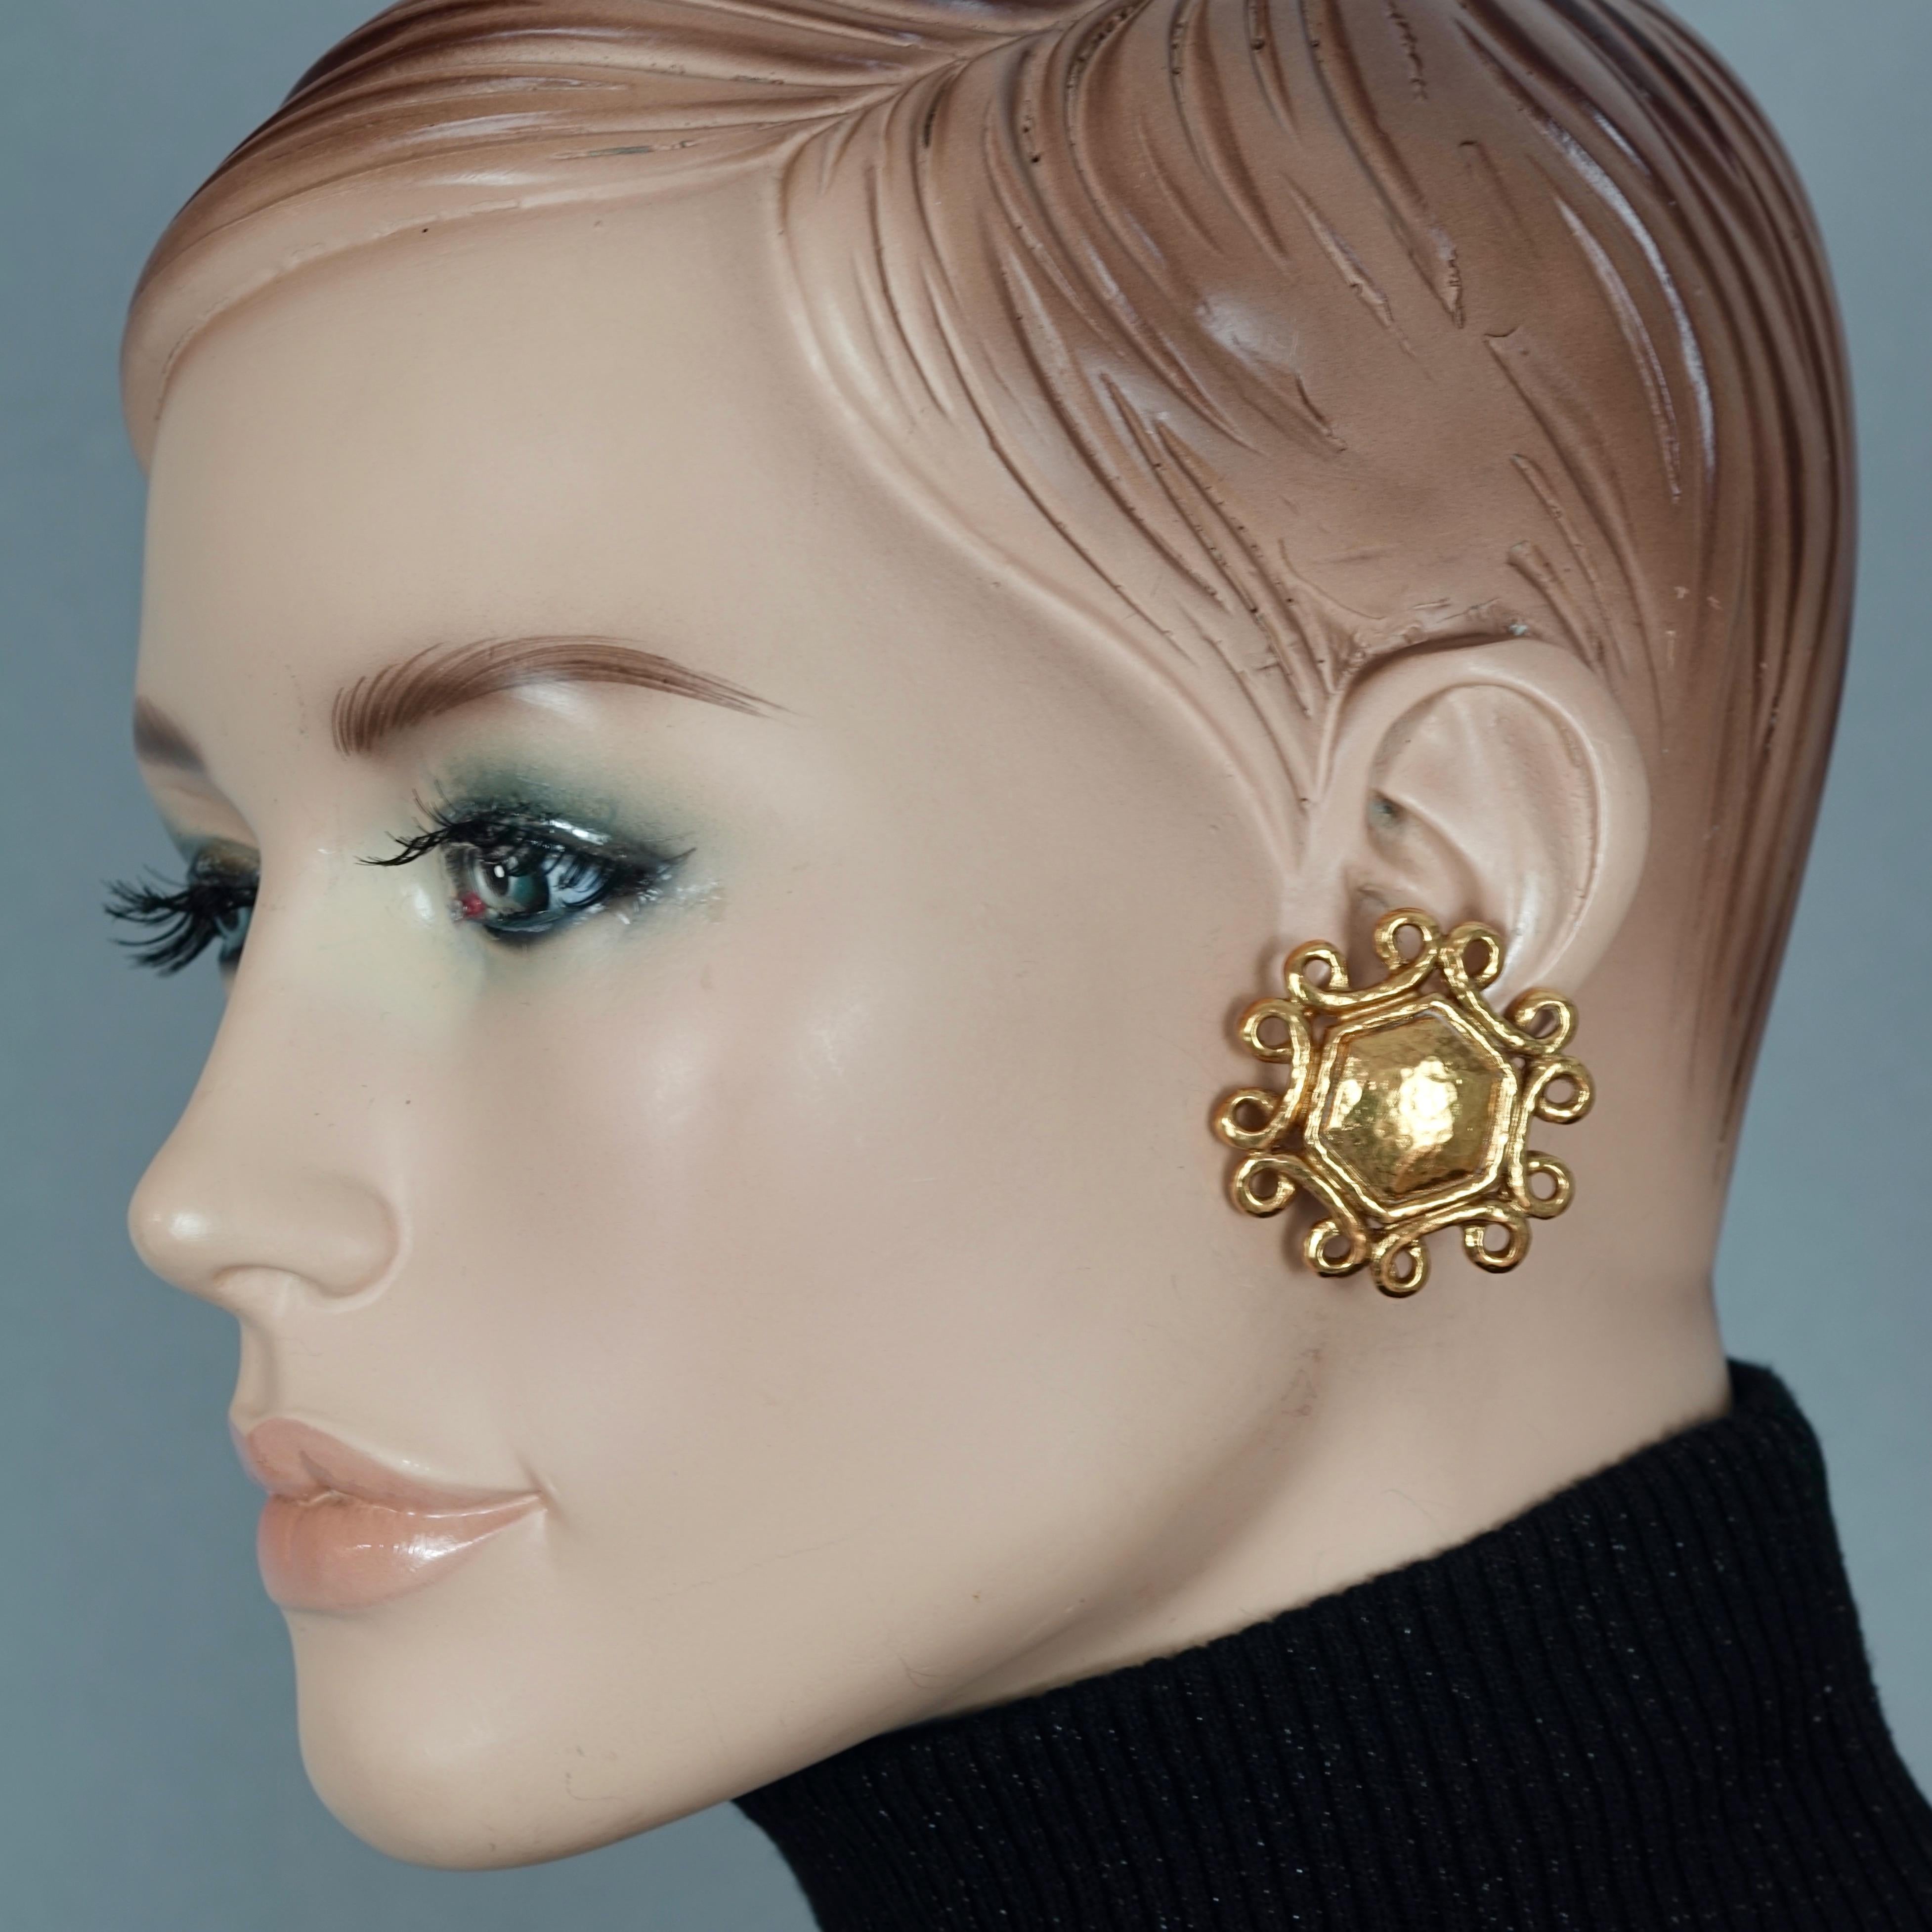 Vintage YVES SAINT LAURENT Ysl Hexagon Swirl Earrings

Measurements:
Height: 1.45 Inches (3.7 cm)
Width: 1.45 Inches (3.7 cm)
Weight per Earring: 16 grams

Features:
- 100% Authentic YVES SAINT LAURENT.
- Hammered hexagon earrings with swirl pattern